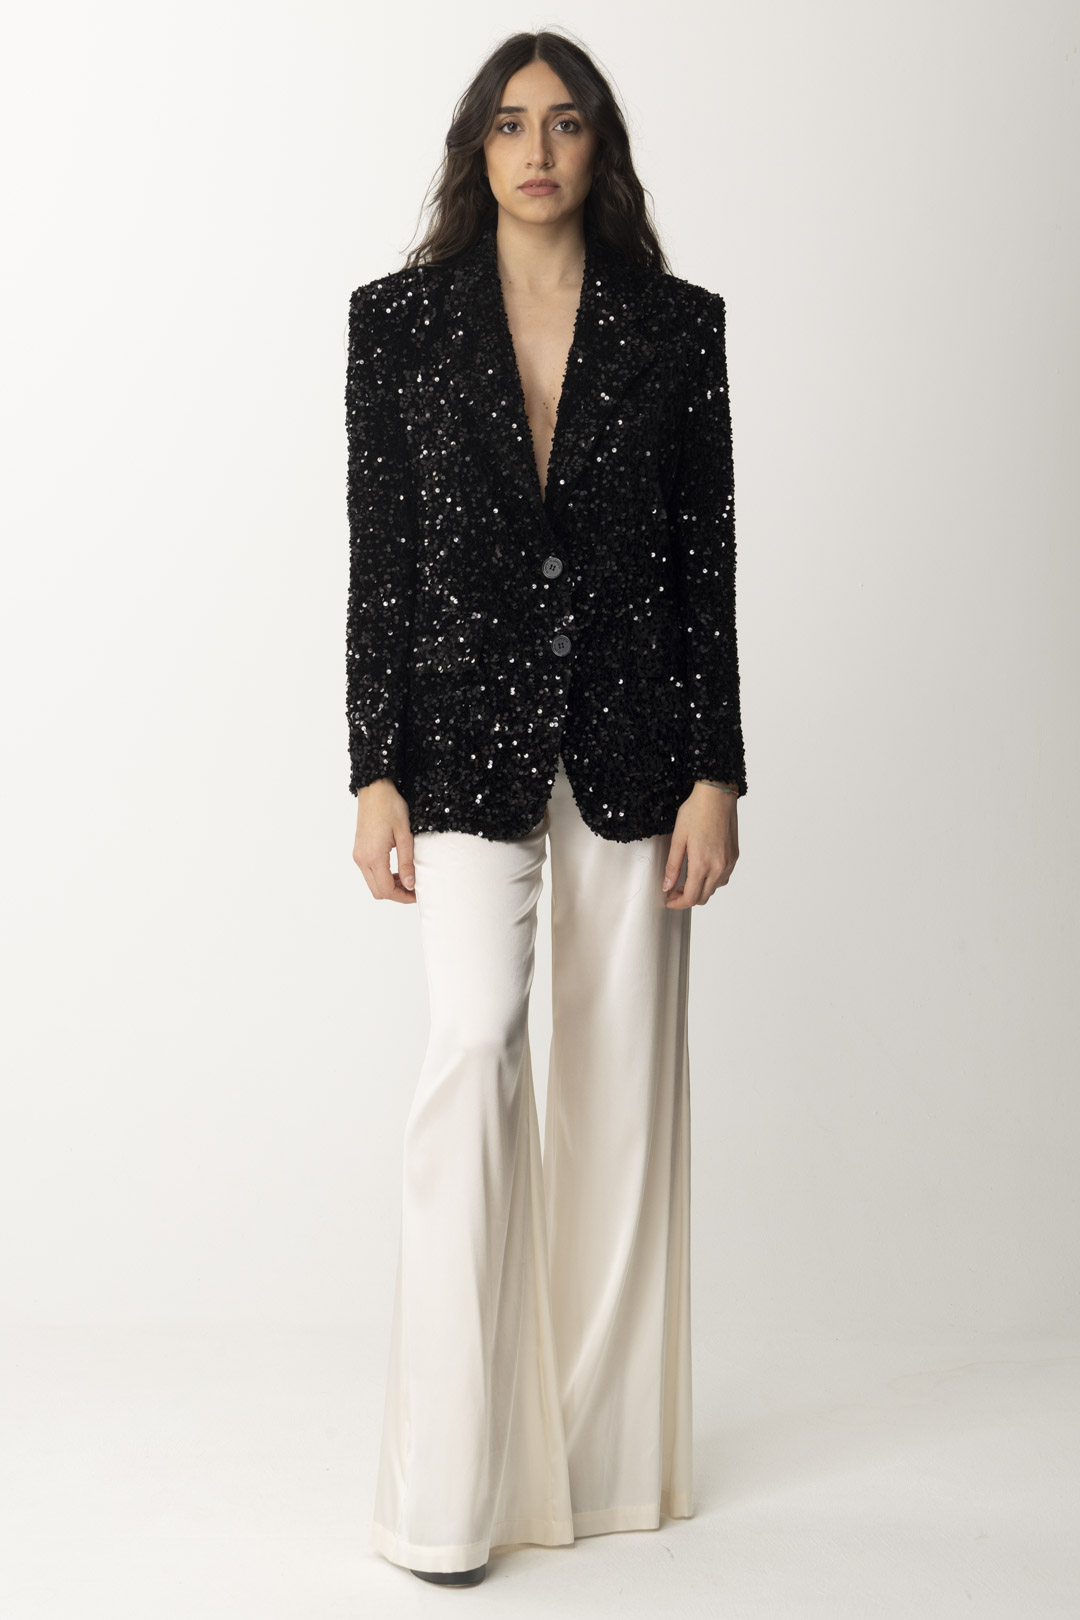 Preview: Elisabetta Franchi Single-Breasted Full Sequin Jacket Nero